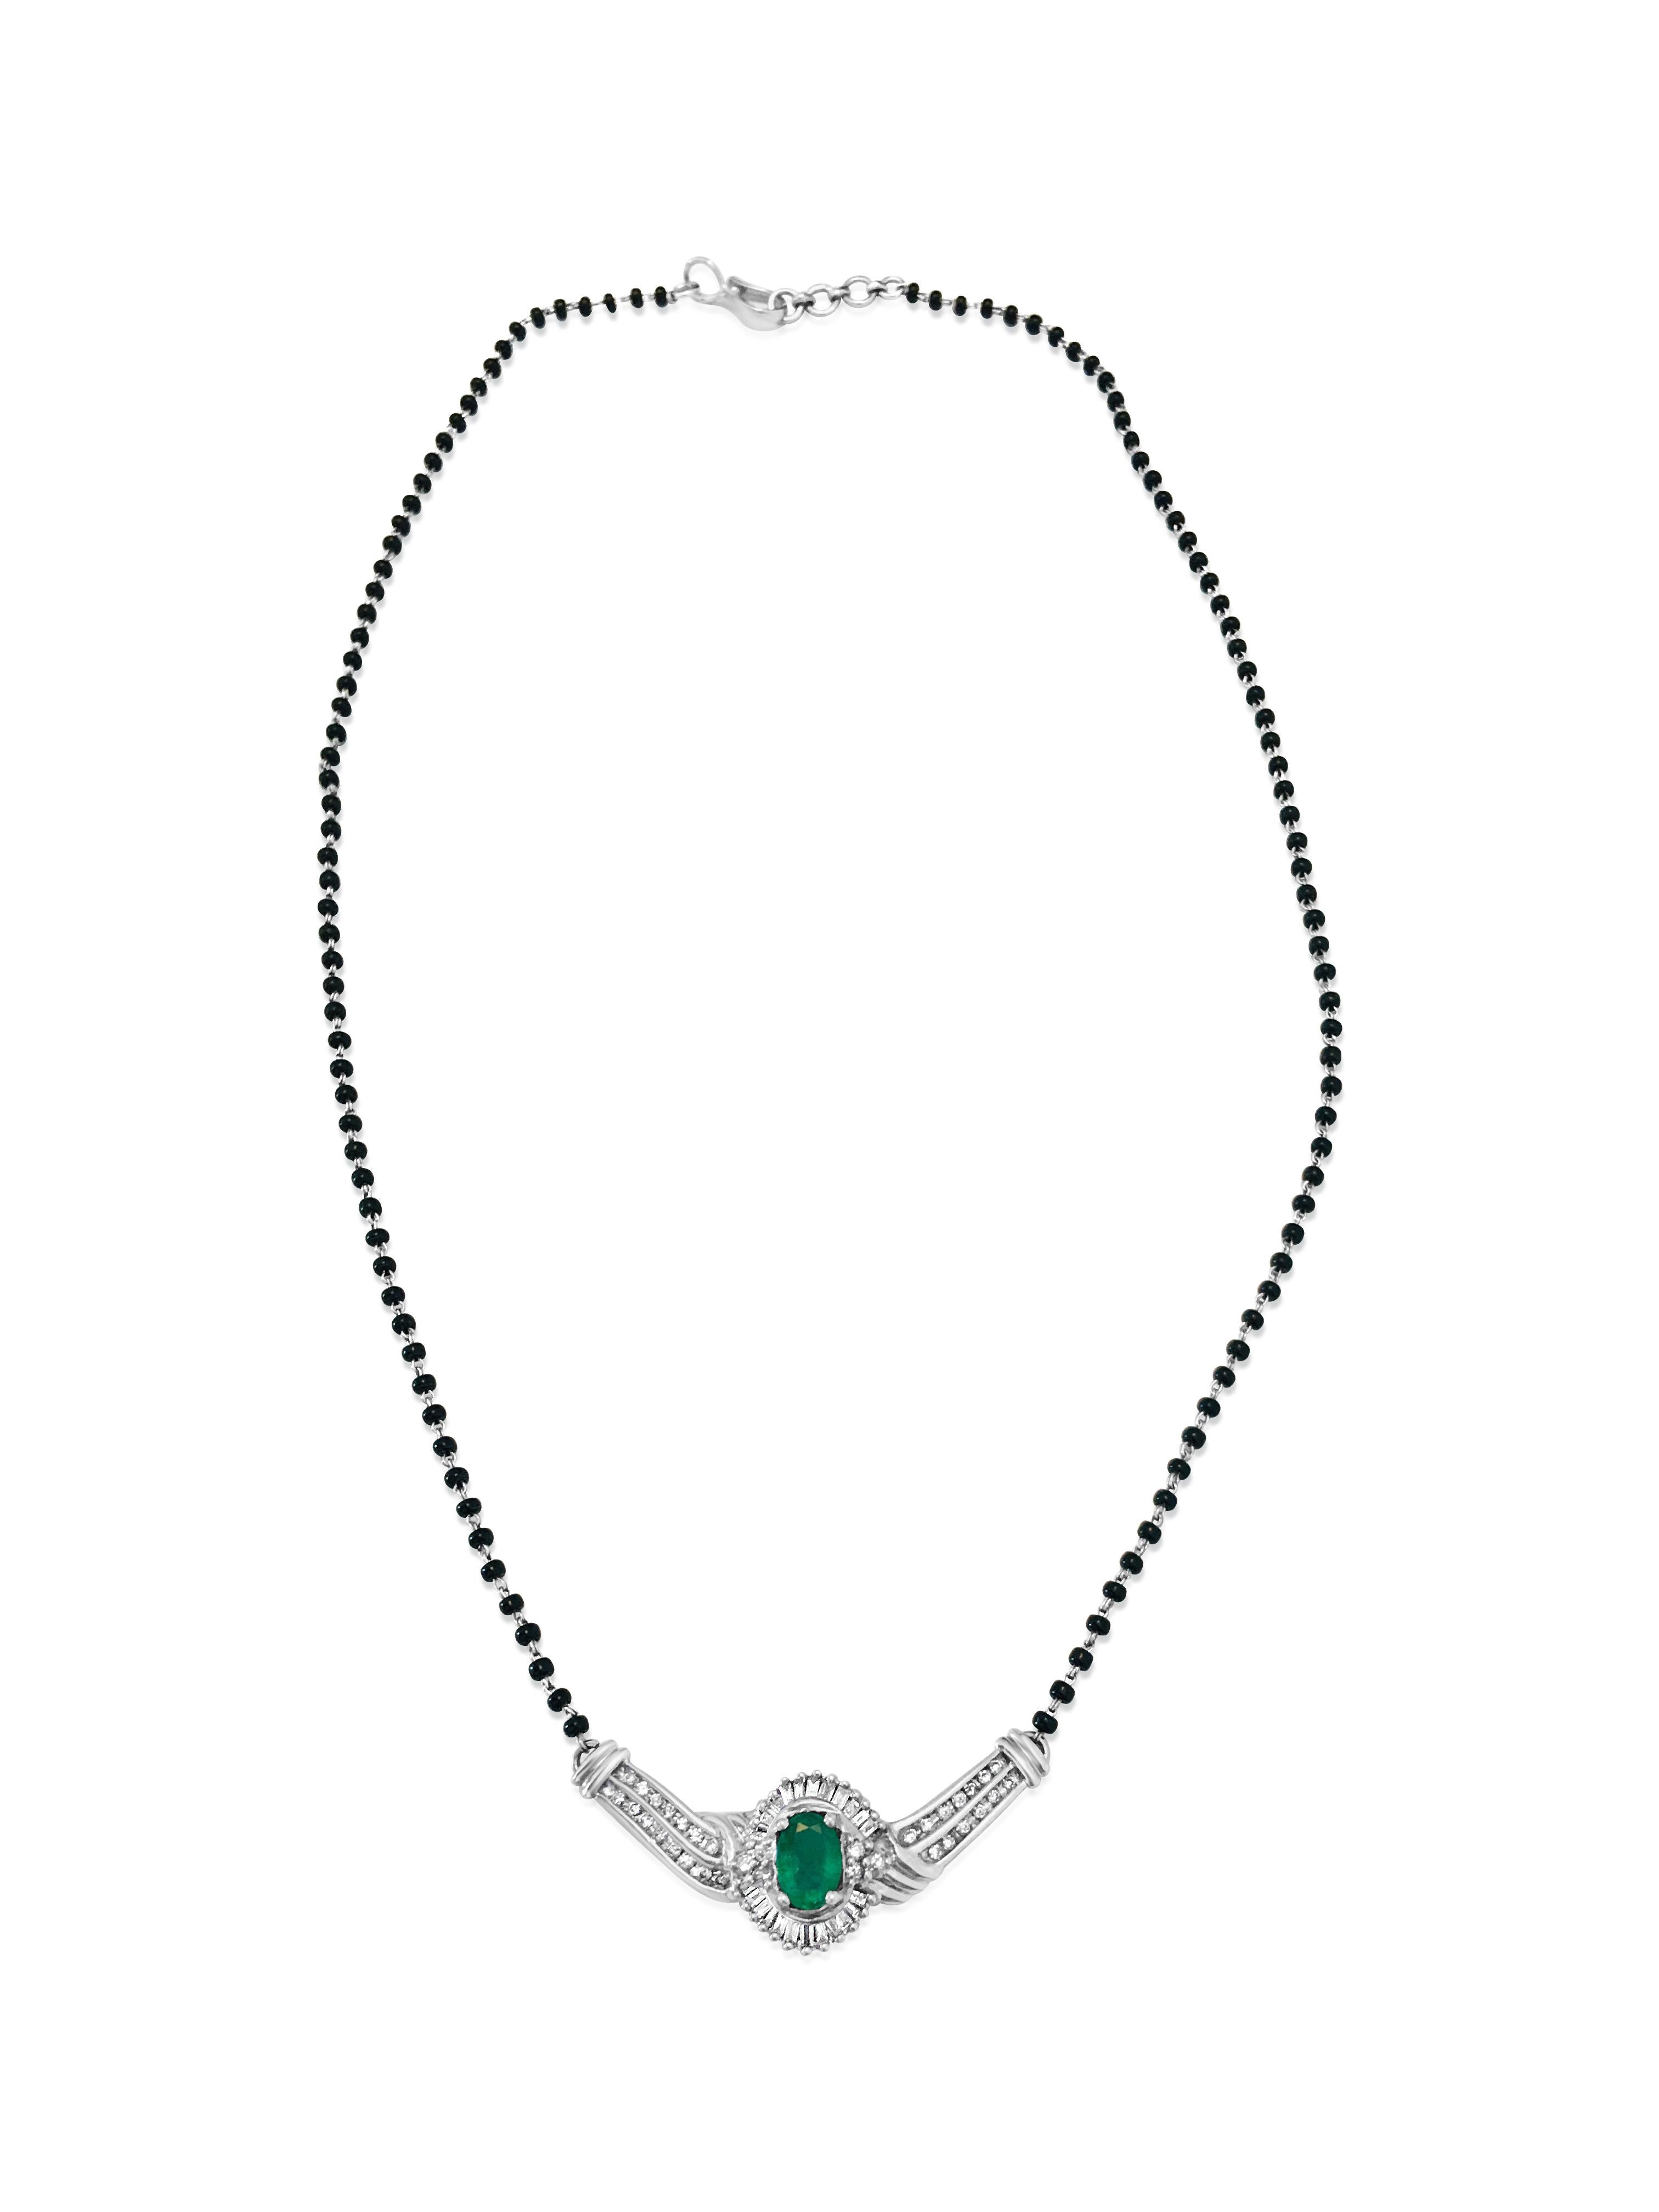 Oval Cut Indian Mangalsutra. 14k, Emerald & Diamond Necklace For Sale